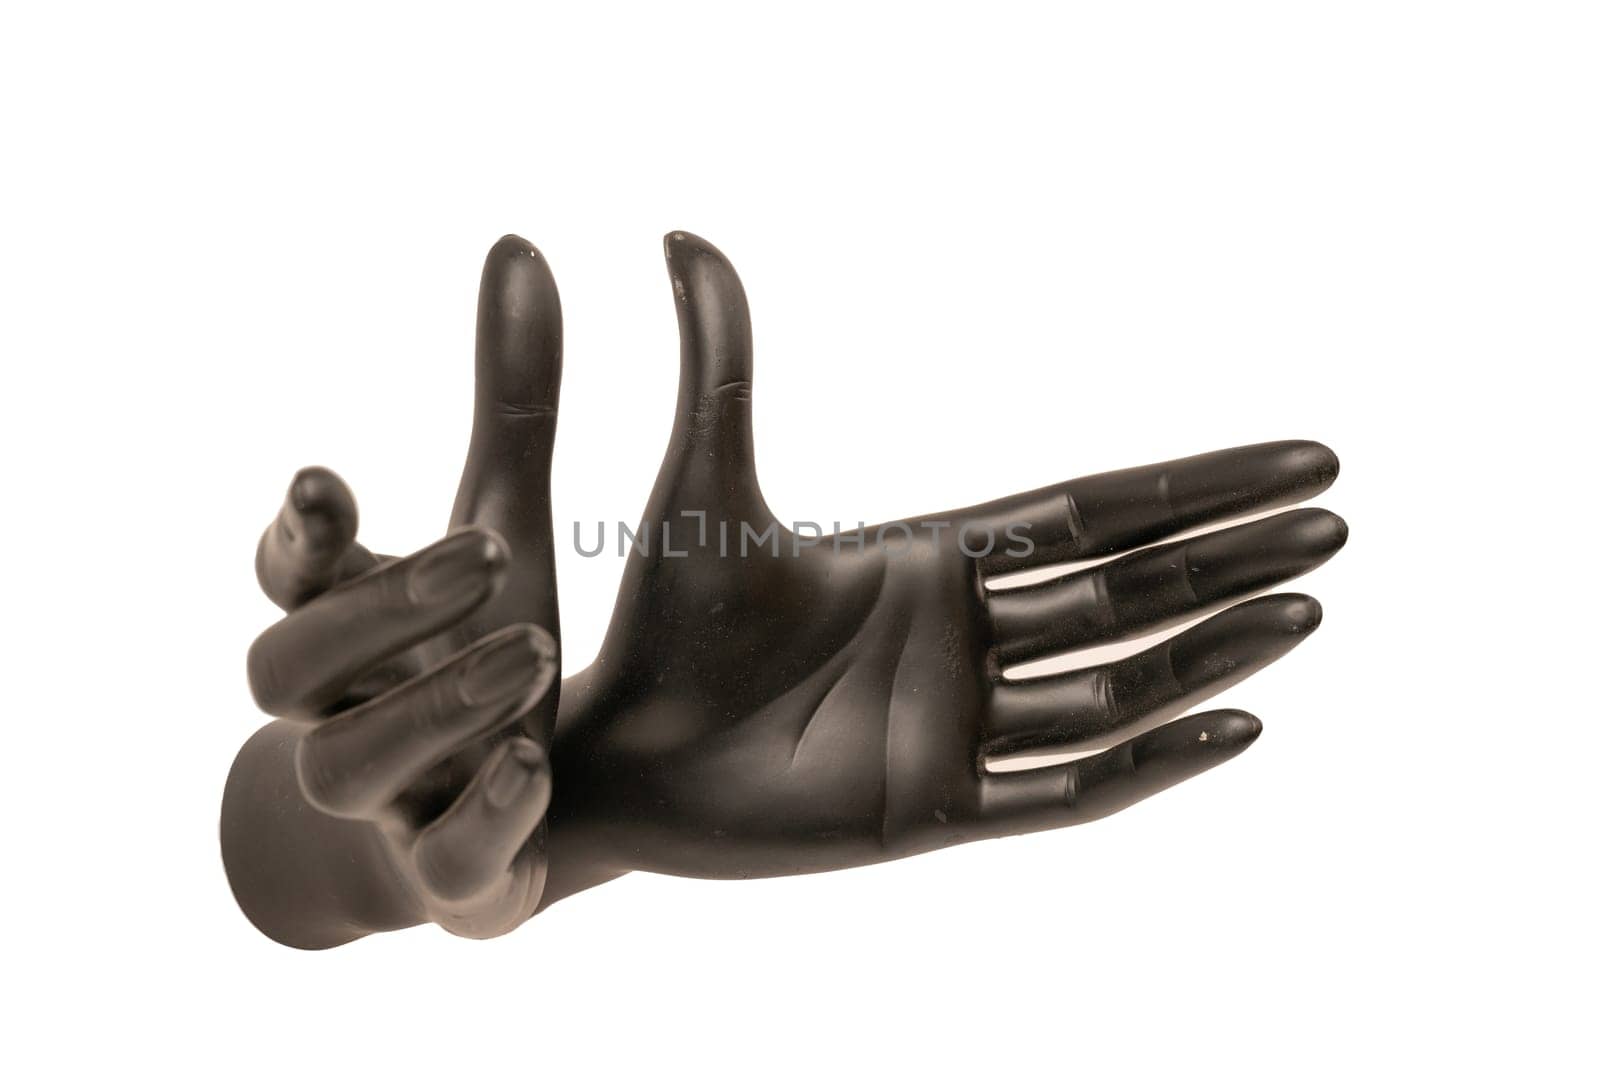 Old shabby mannequin hands on a white background